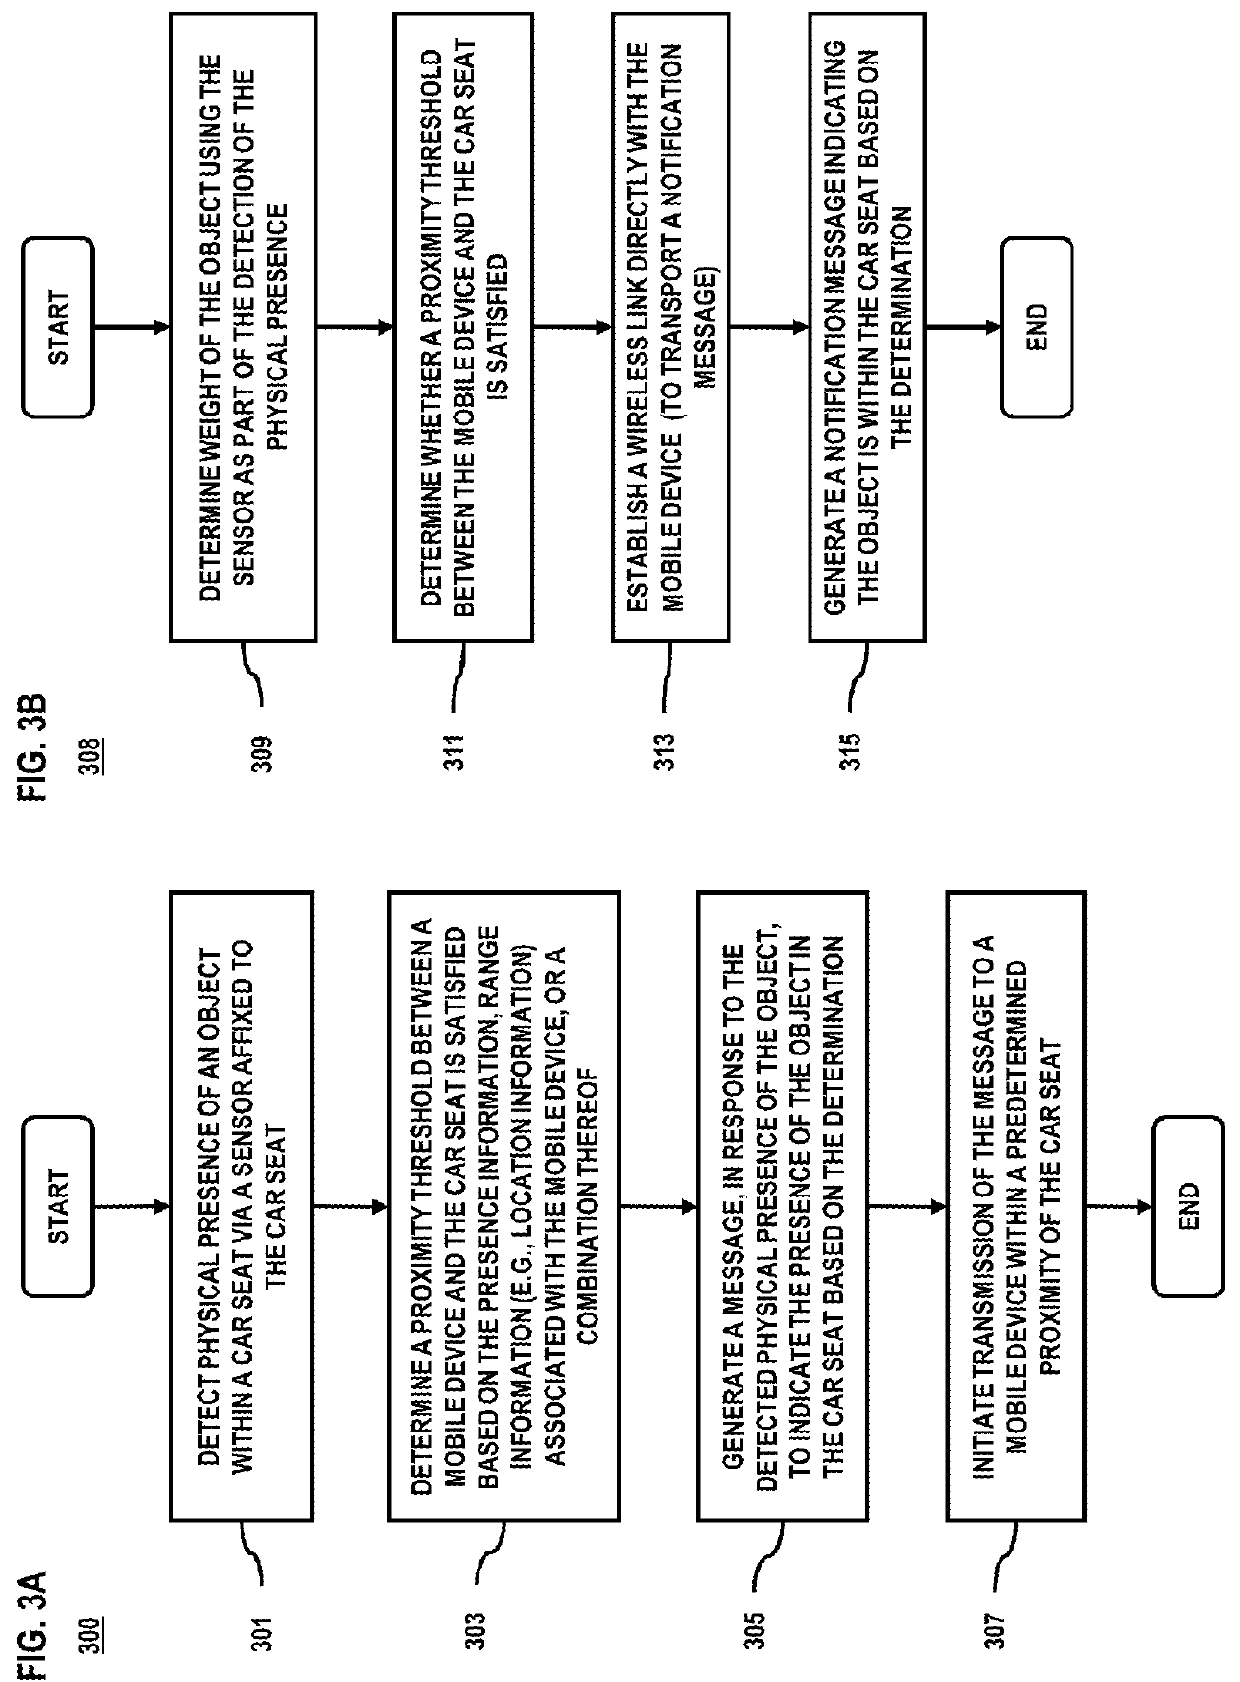 Method and system for generating an alert based on car seat use detection